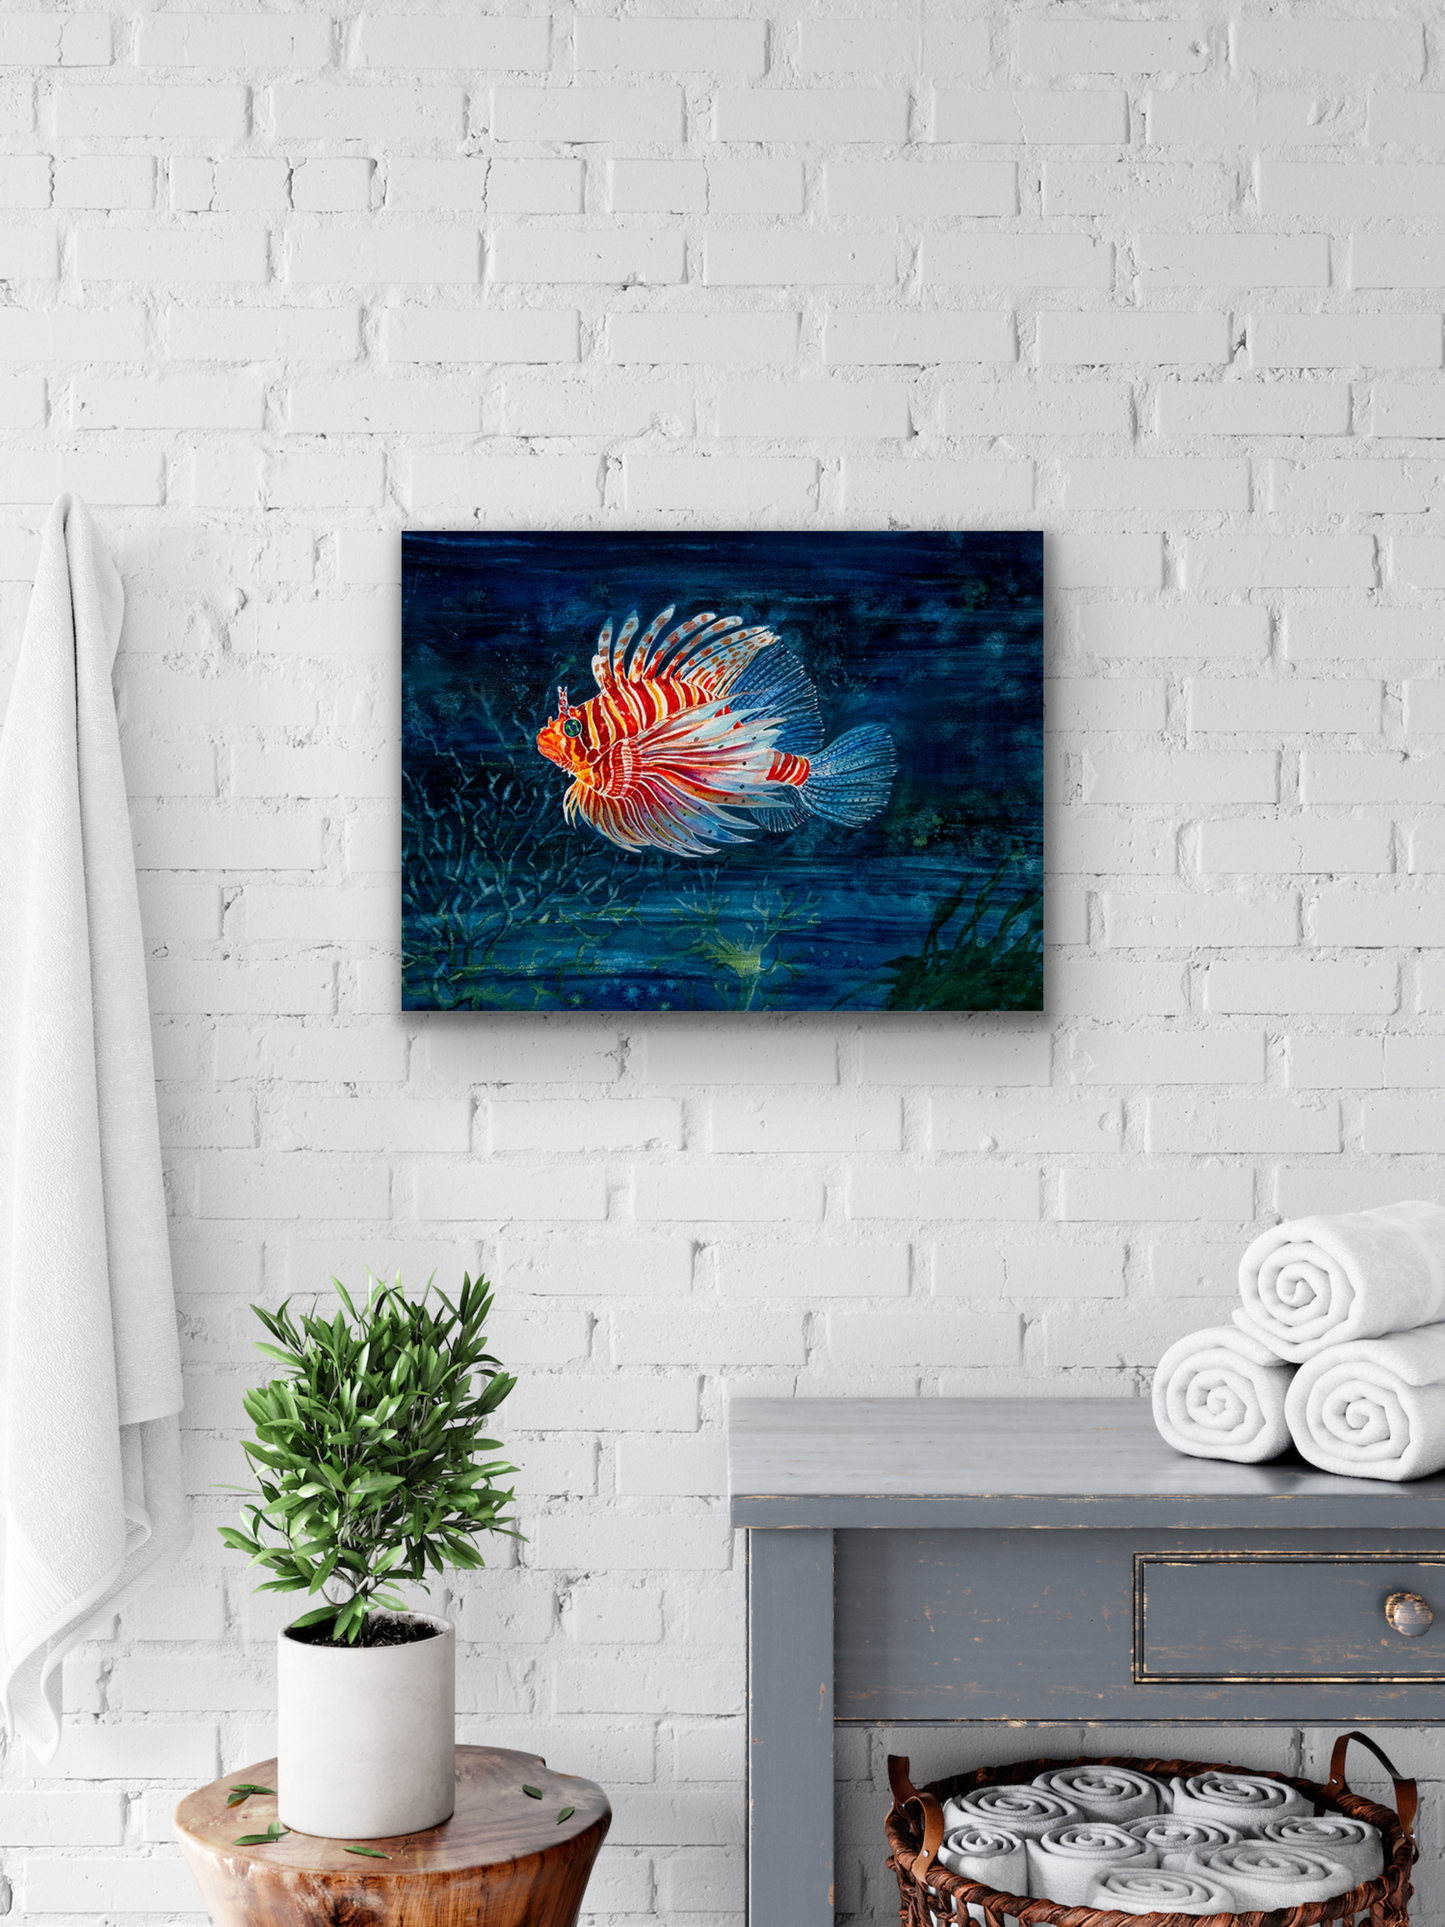 Susan Holmes "Red Lionfish" watercolour print is available as a giclee canvas print or as a fine art print.